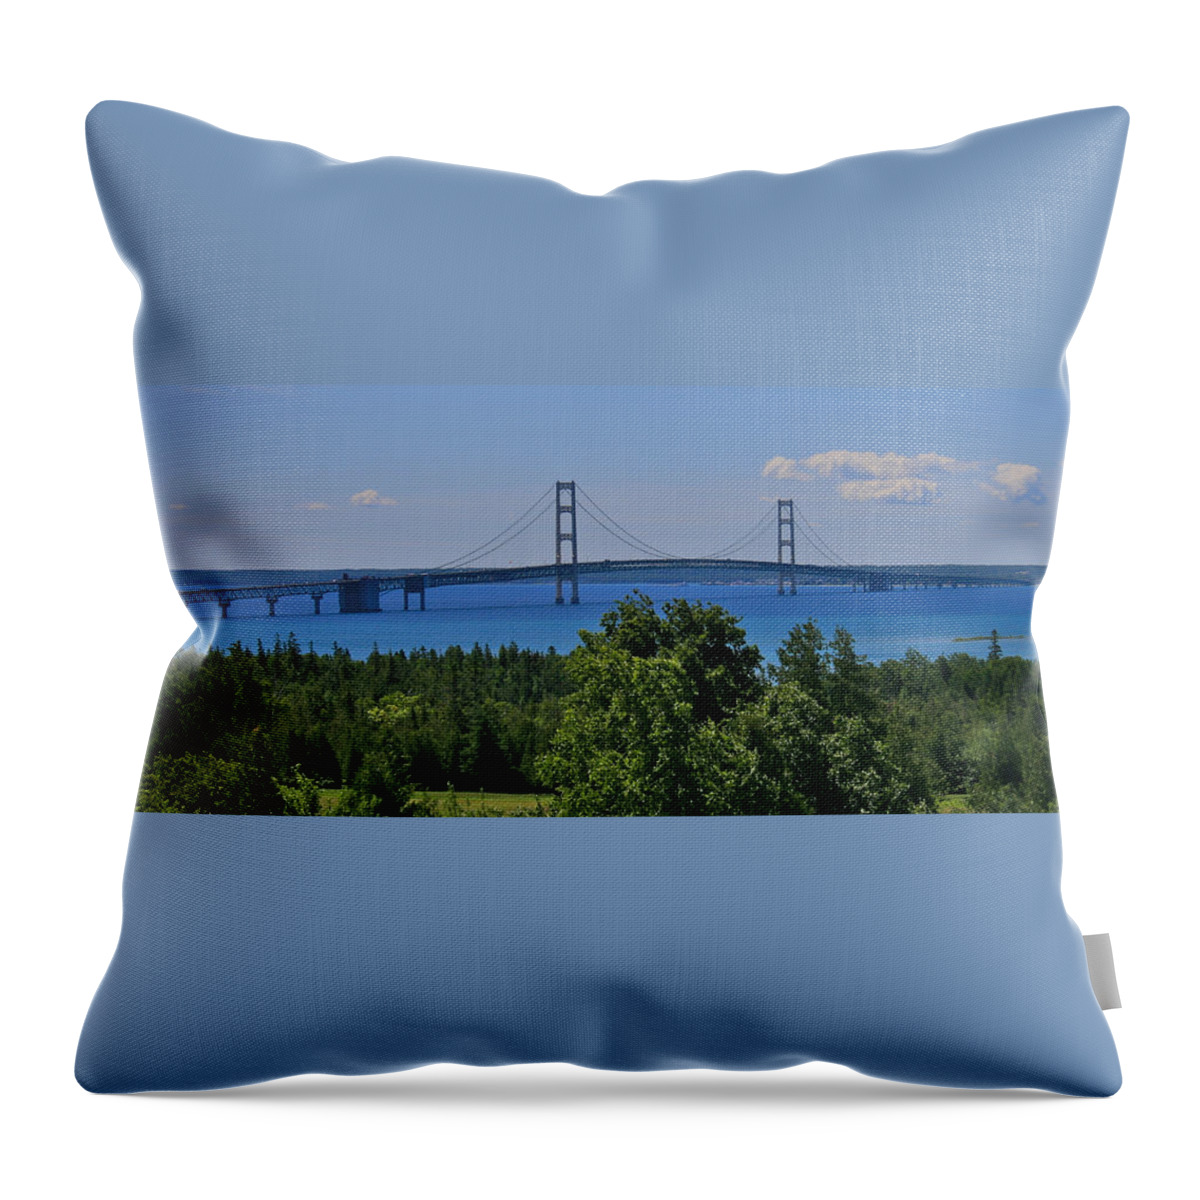 Blue Throw Pillow featuring the photograph The Crossing by Kathleen Scanlan